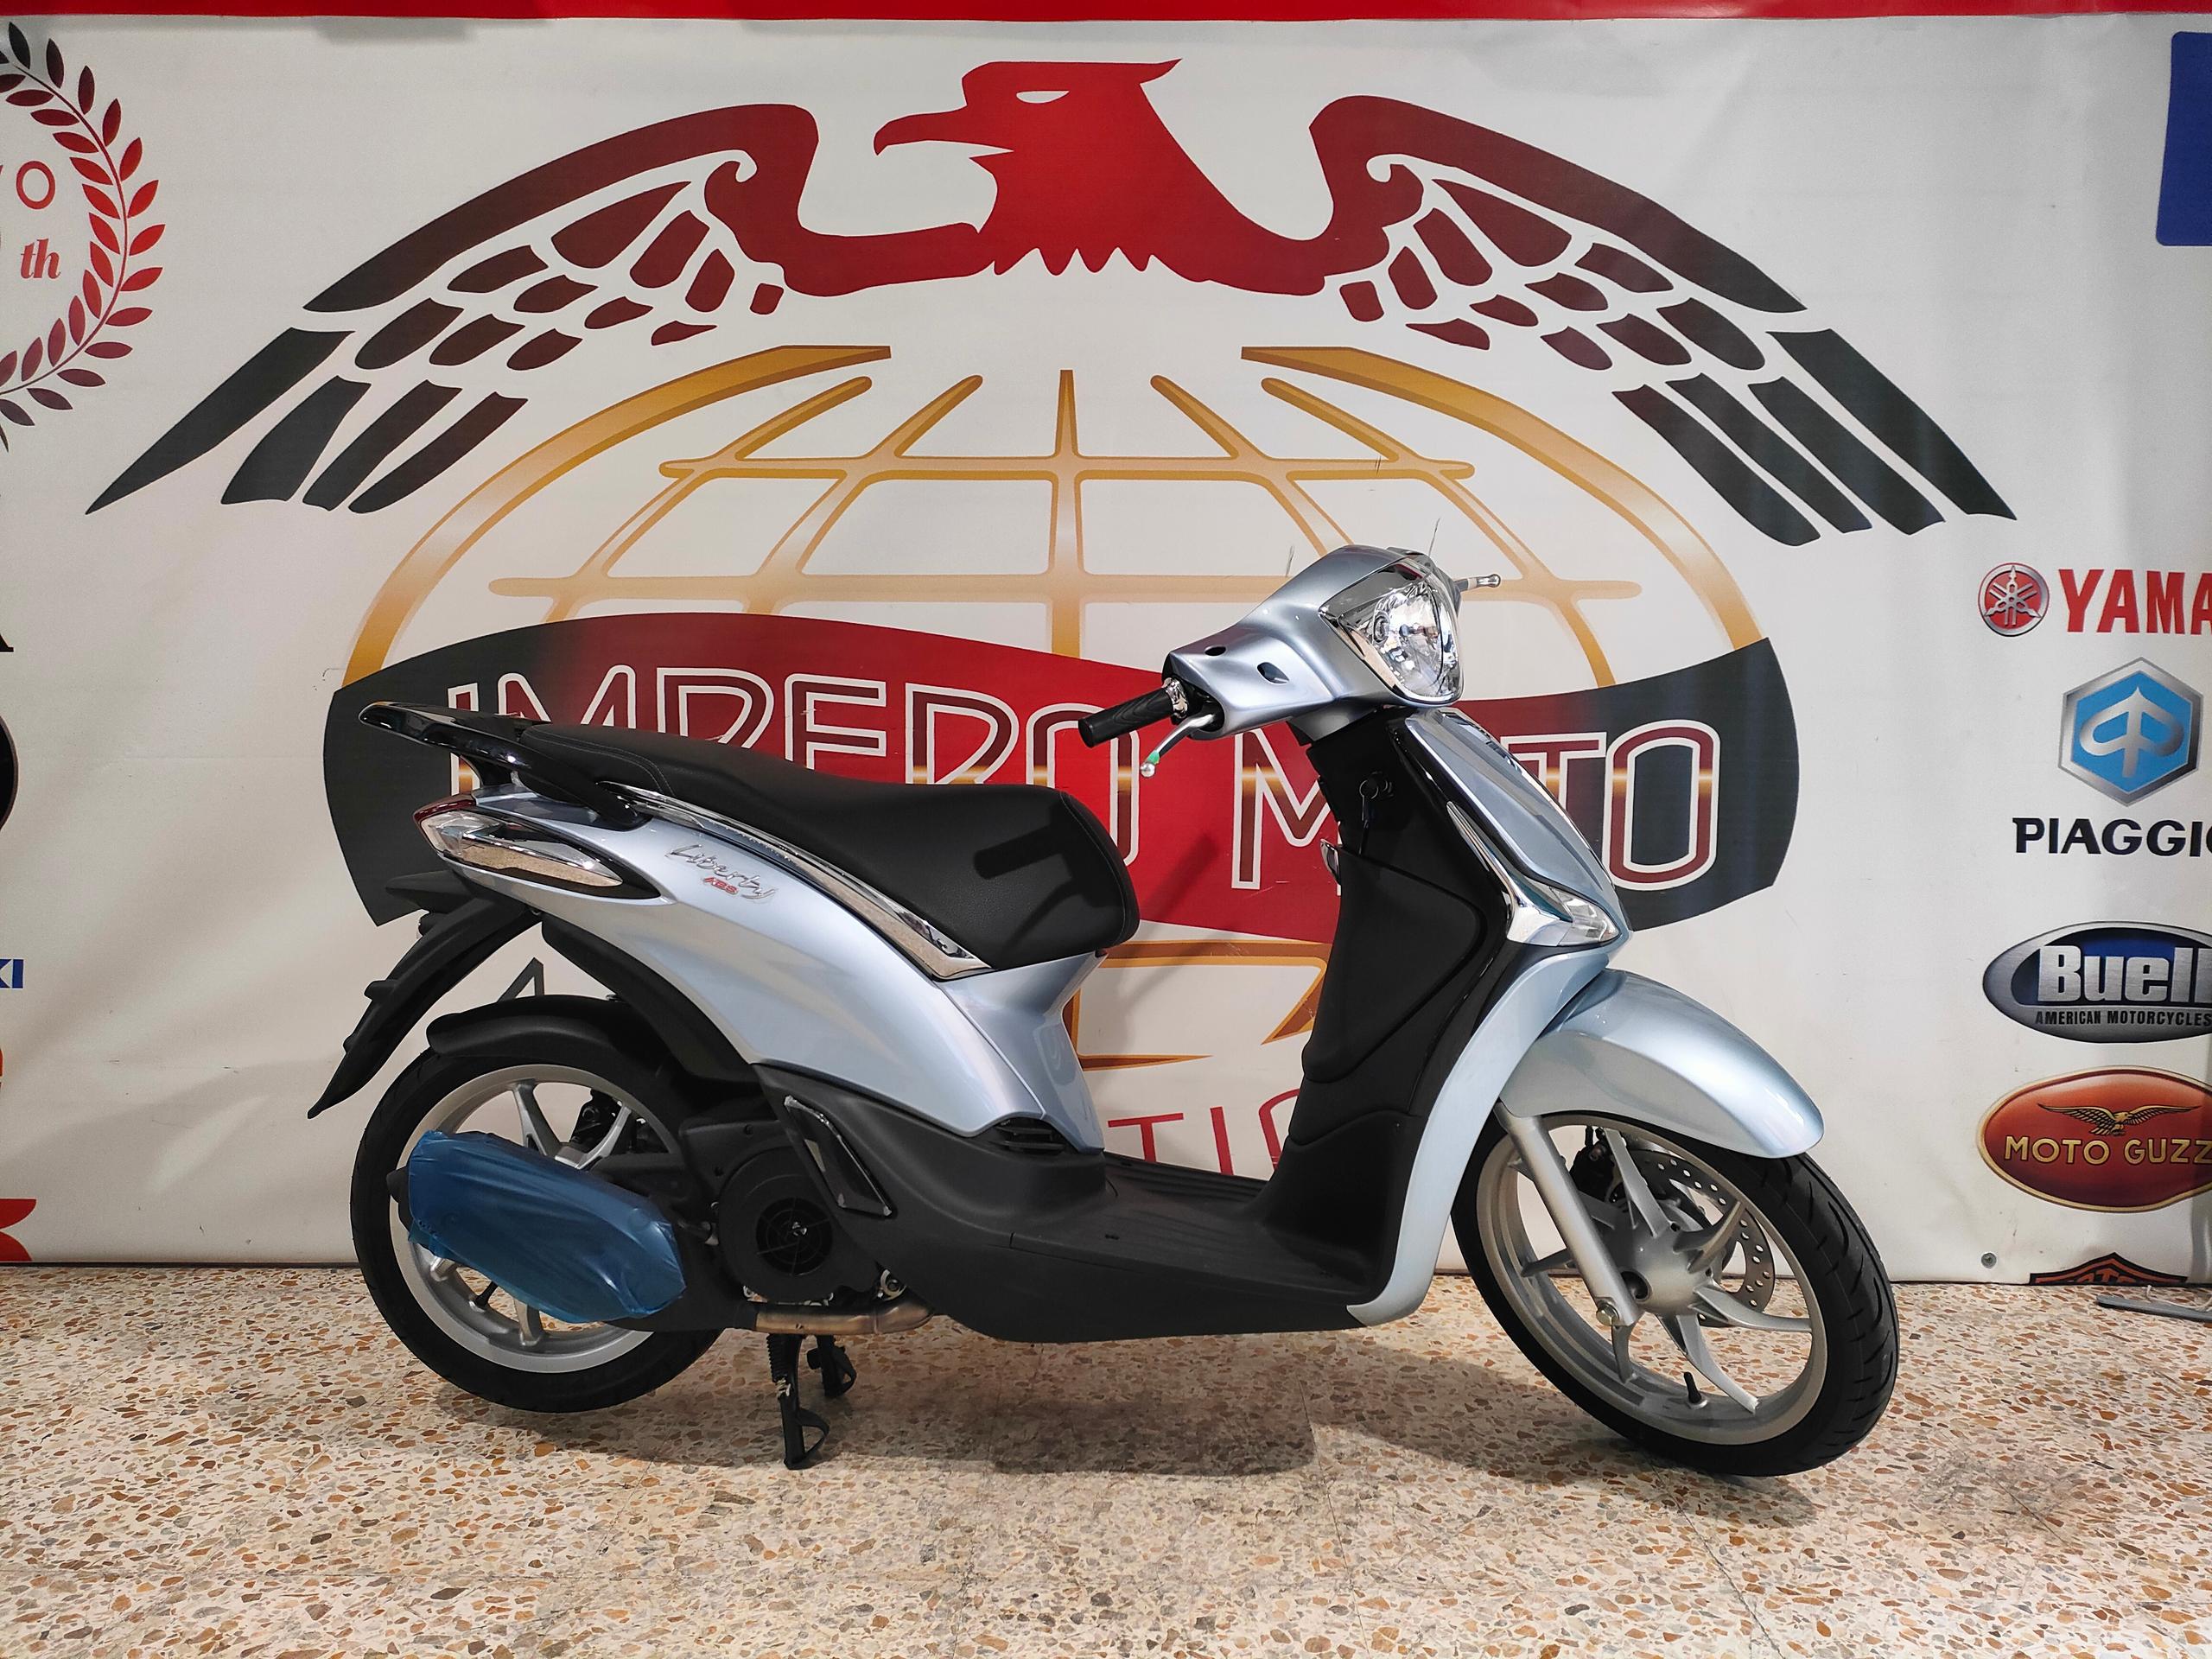 Liberty 125 ABS nuovo in pronta consegna